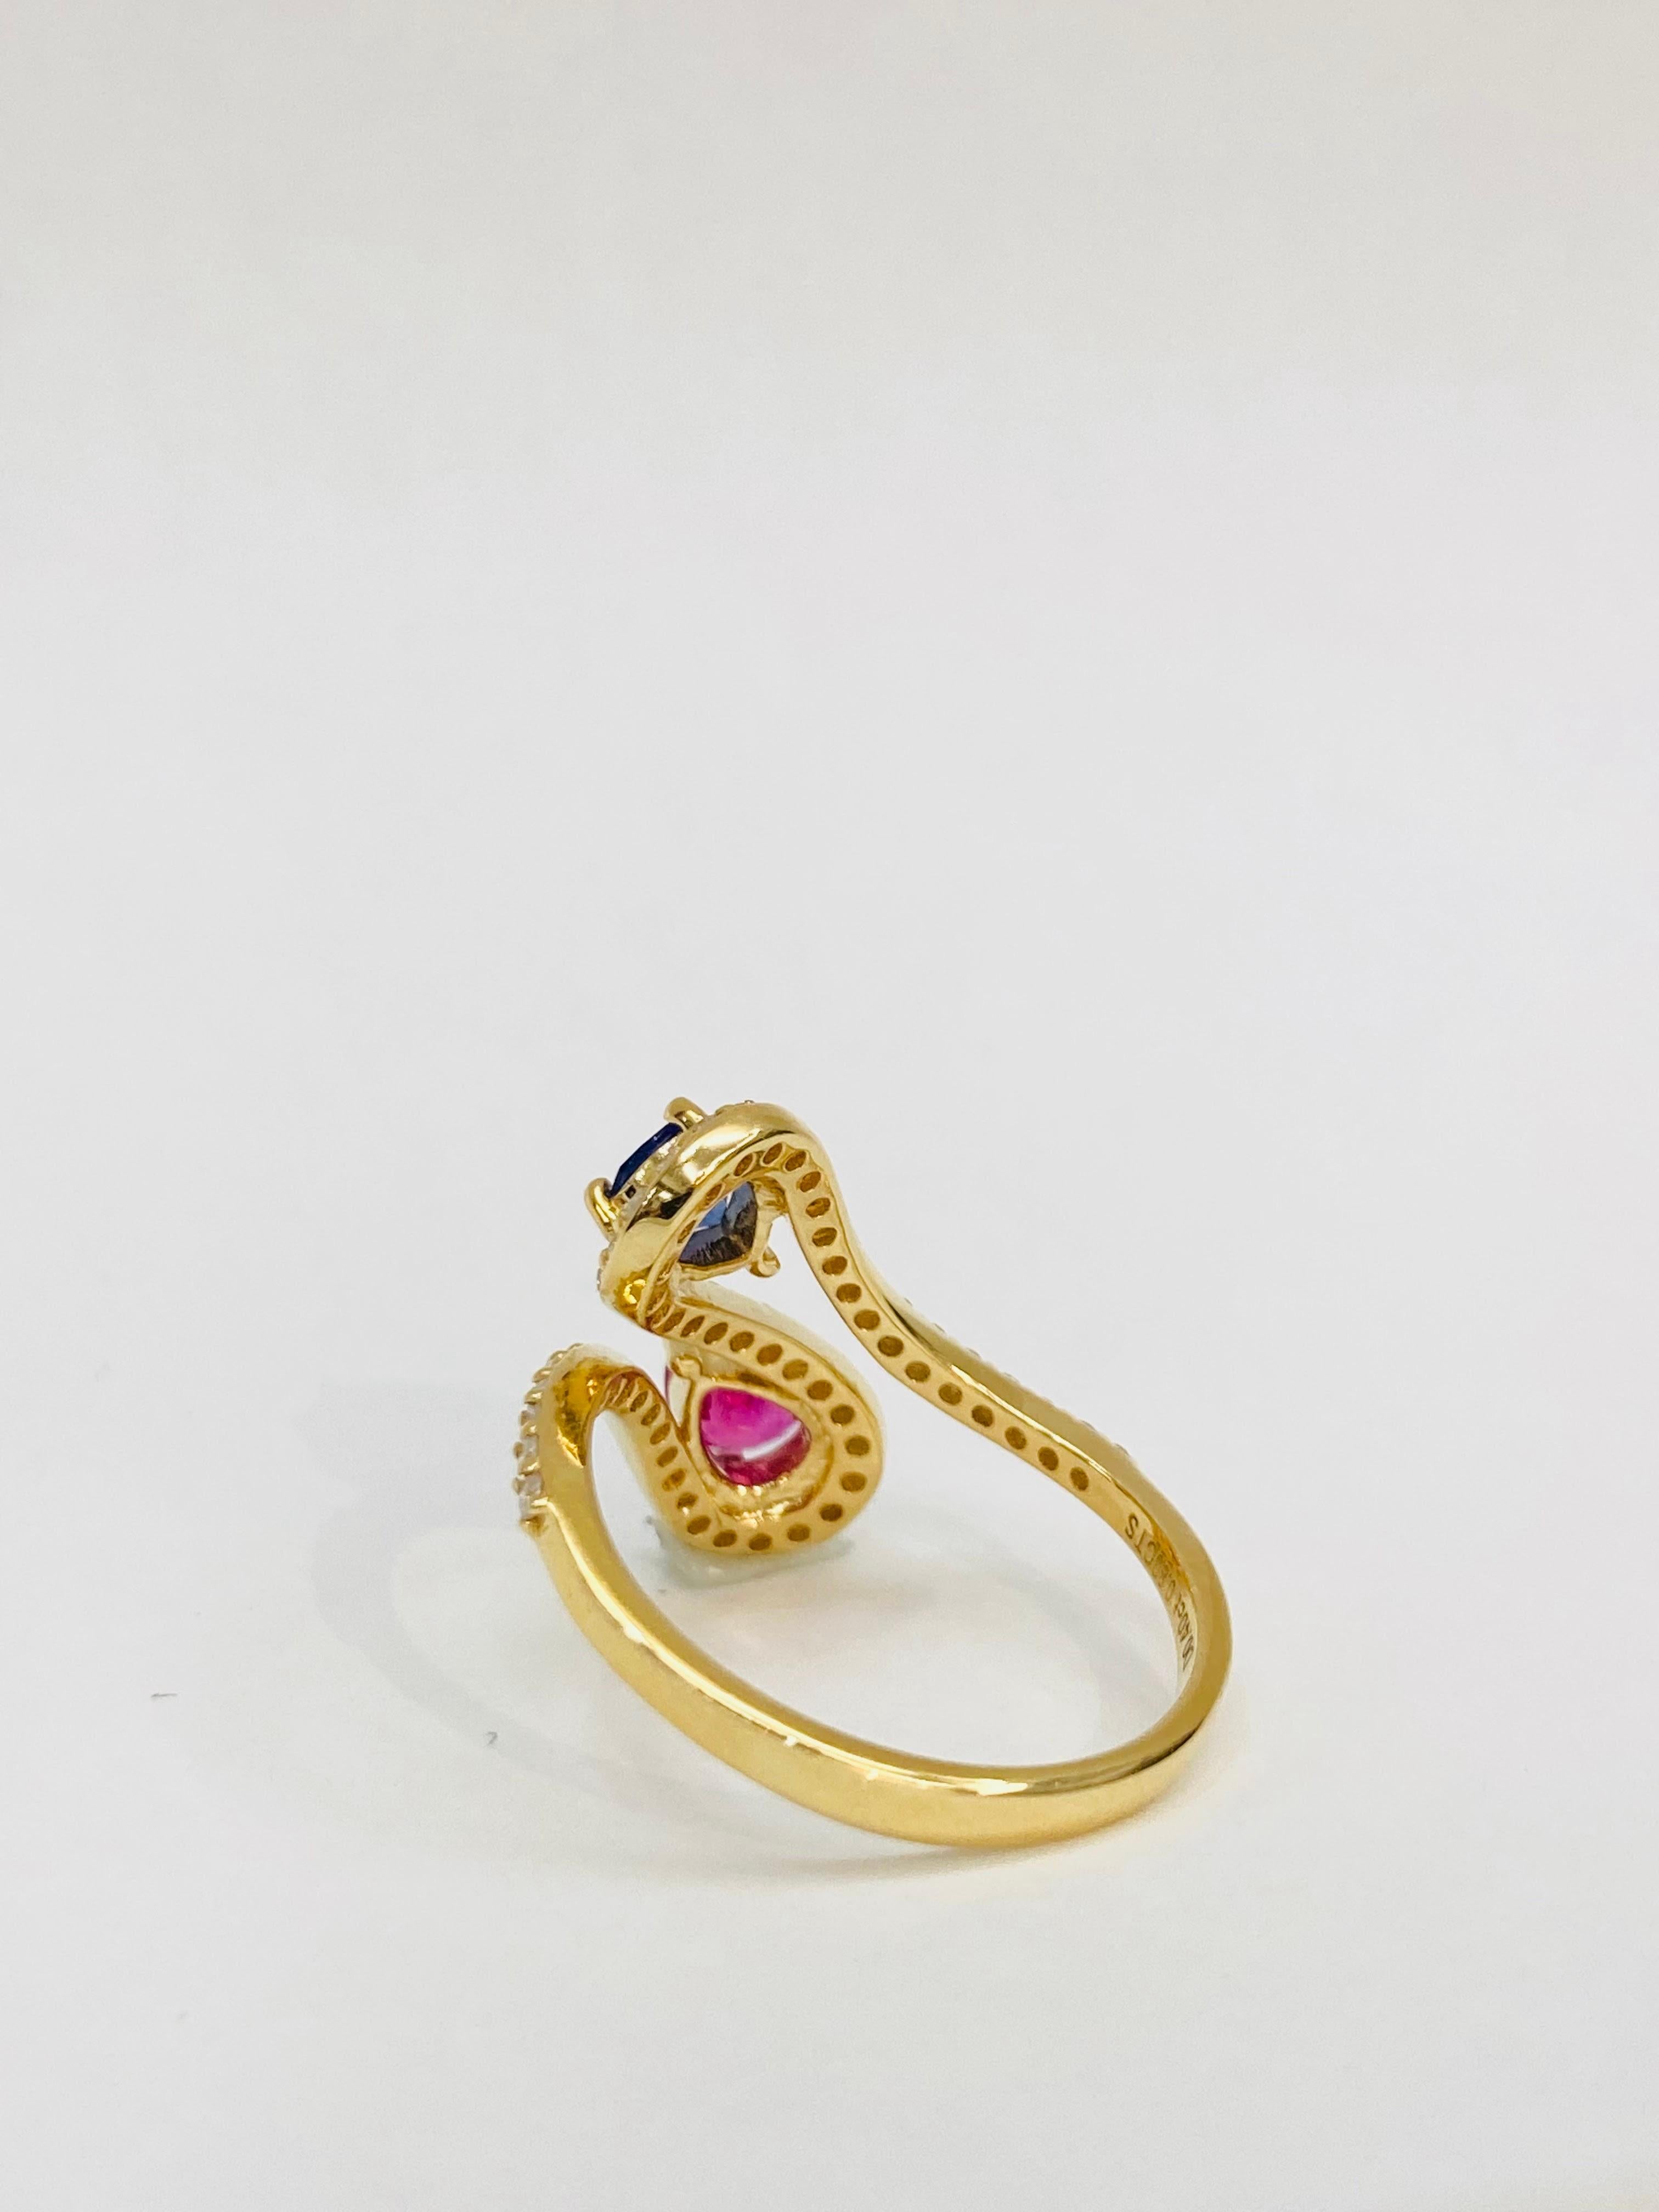 Bochic 2 Color “Retro Vintage” Ruby & Sapphire 18K Gold & Diamond Cluster Ring. For Sale 2